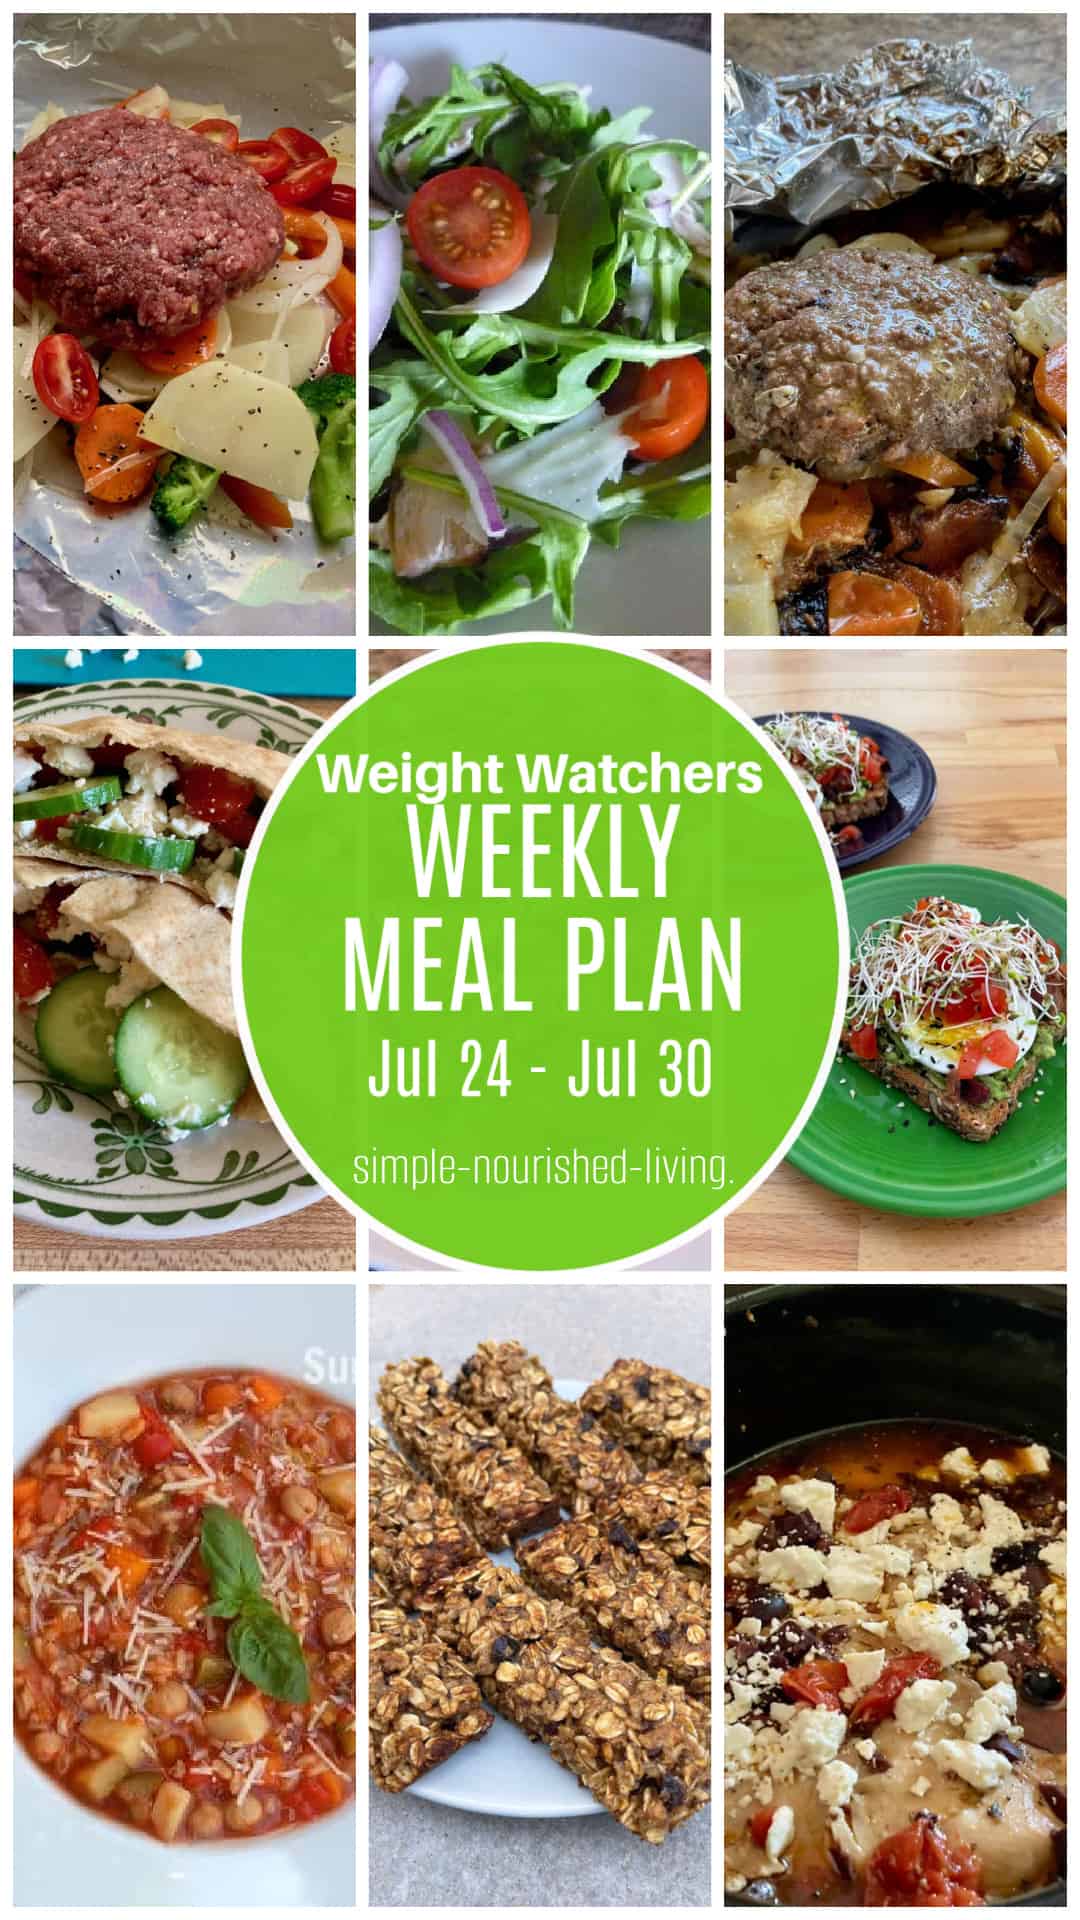 9-frame food collage with green round text box overlay: Weight Watchers Weekly Meal Plan July 24-July 30.